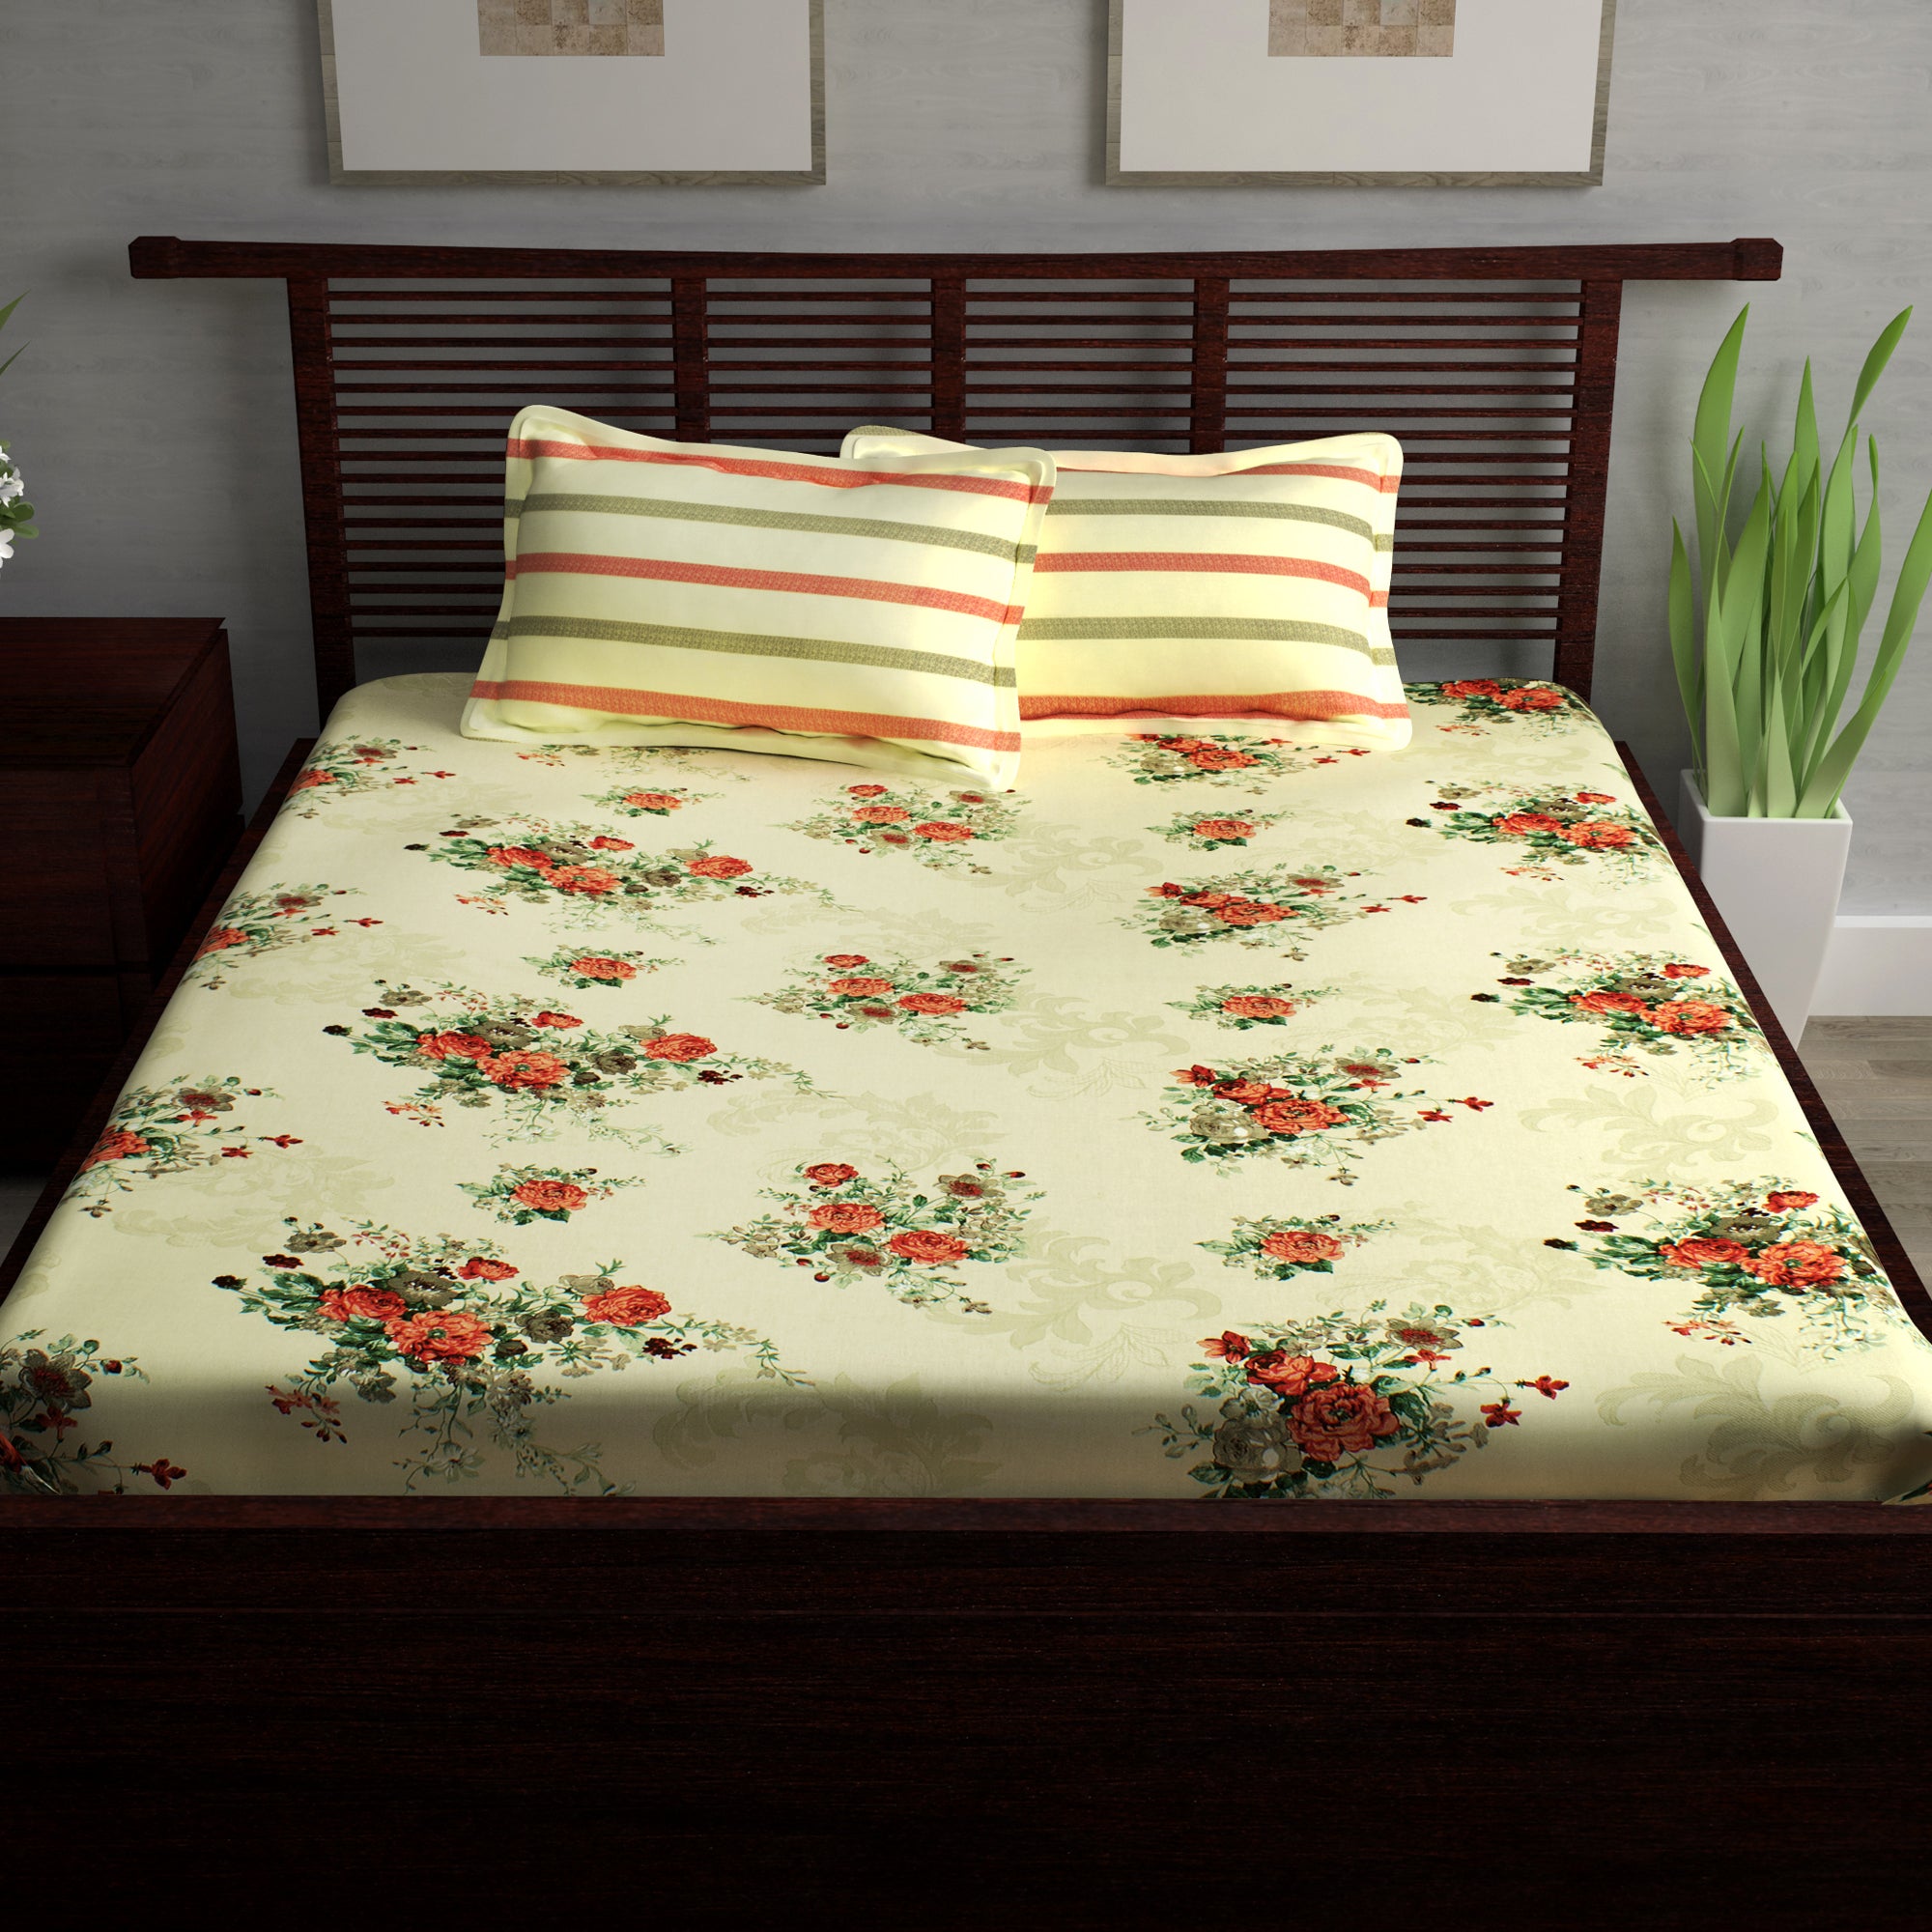 Metro Cotton Double Bedsheets Combo - 186 TC- Grey and Cream/Orange - Floral